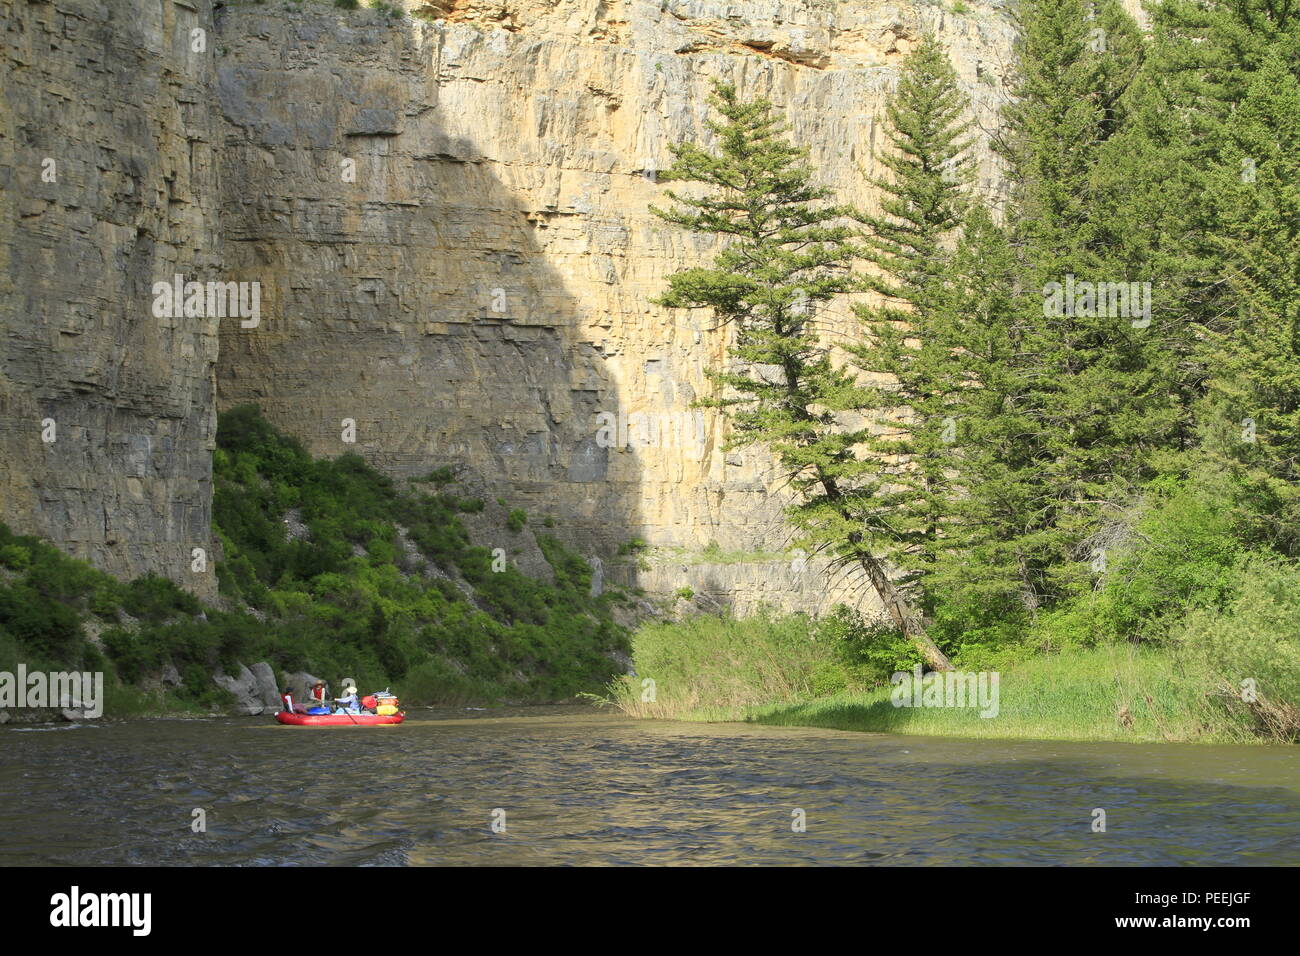 Rafters rounding a cliff bend in the river, Smith River State Park, Montana, USA Stock Photo